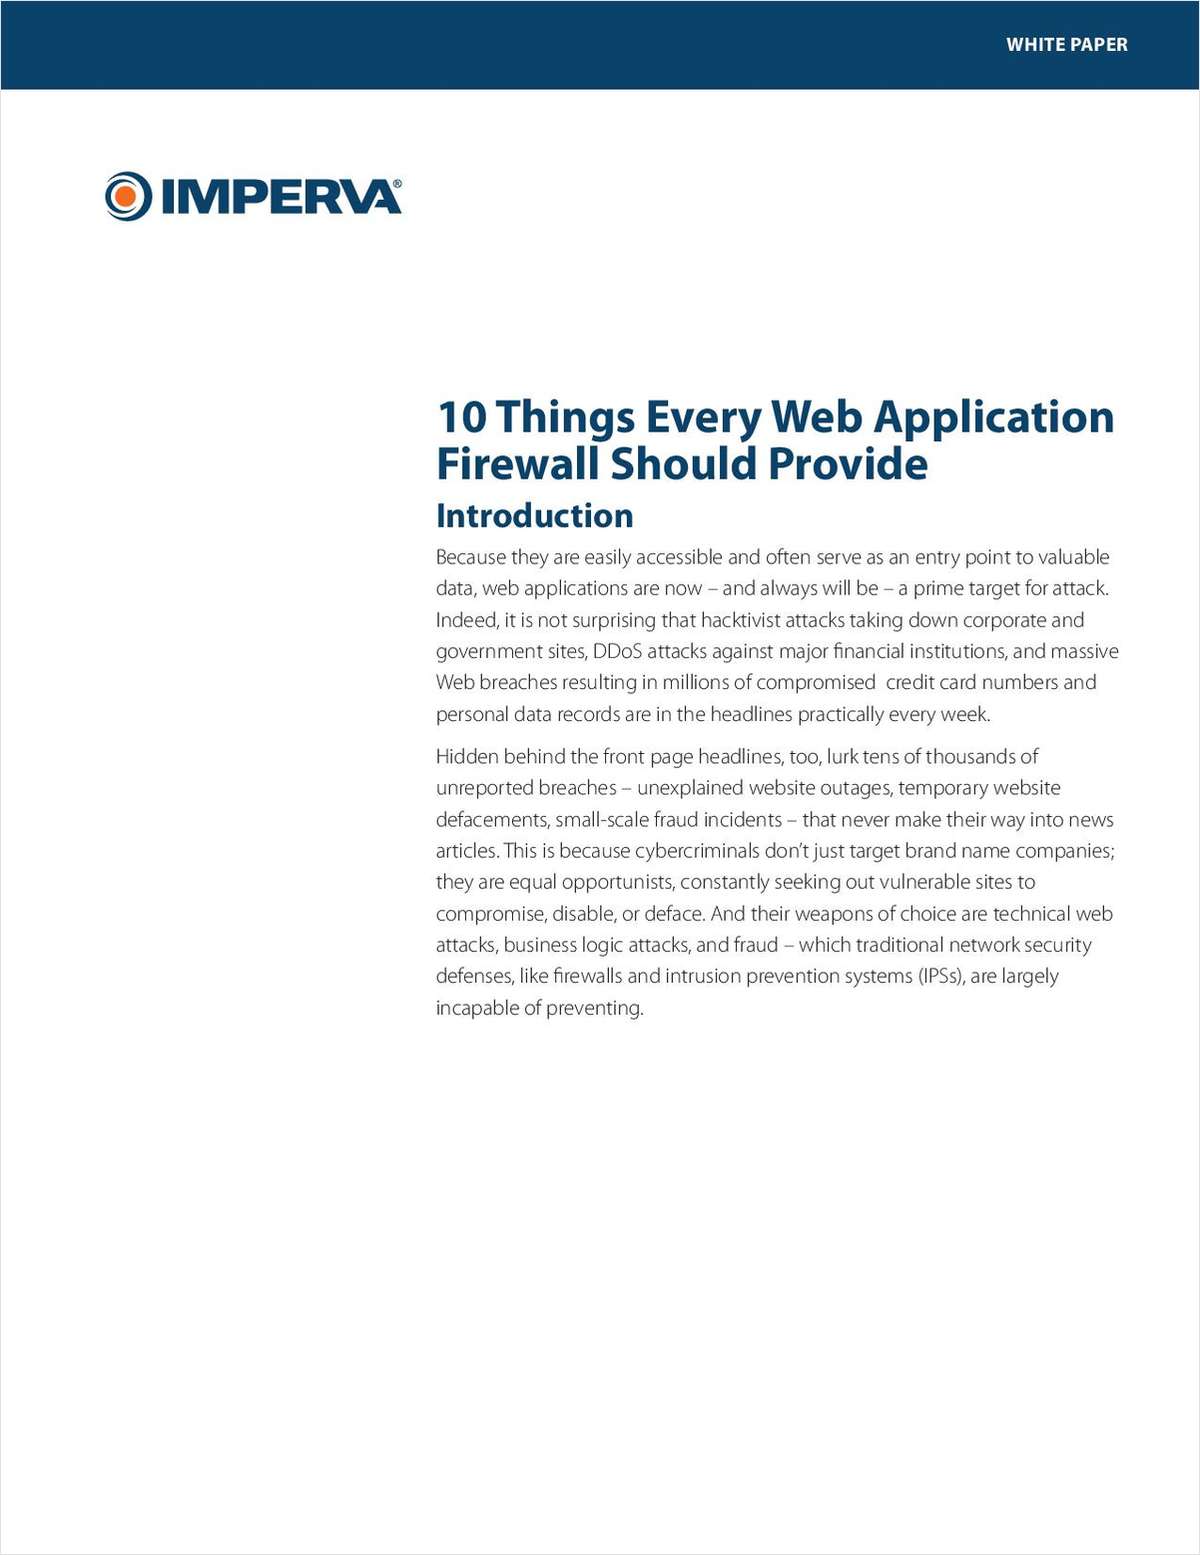 10 Features Every Web App Firewall Should Provide